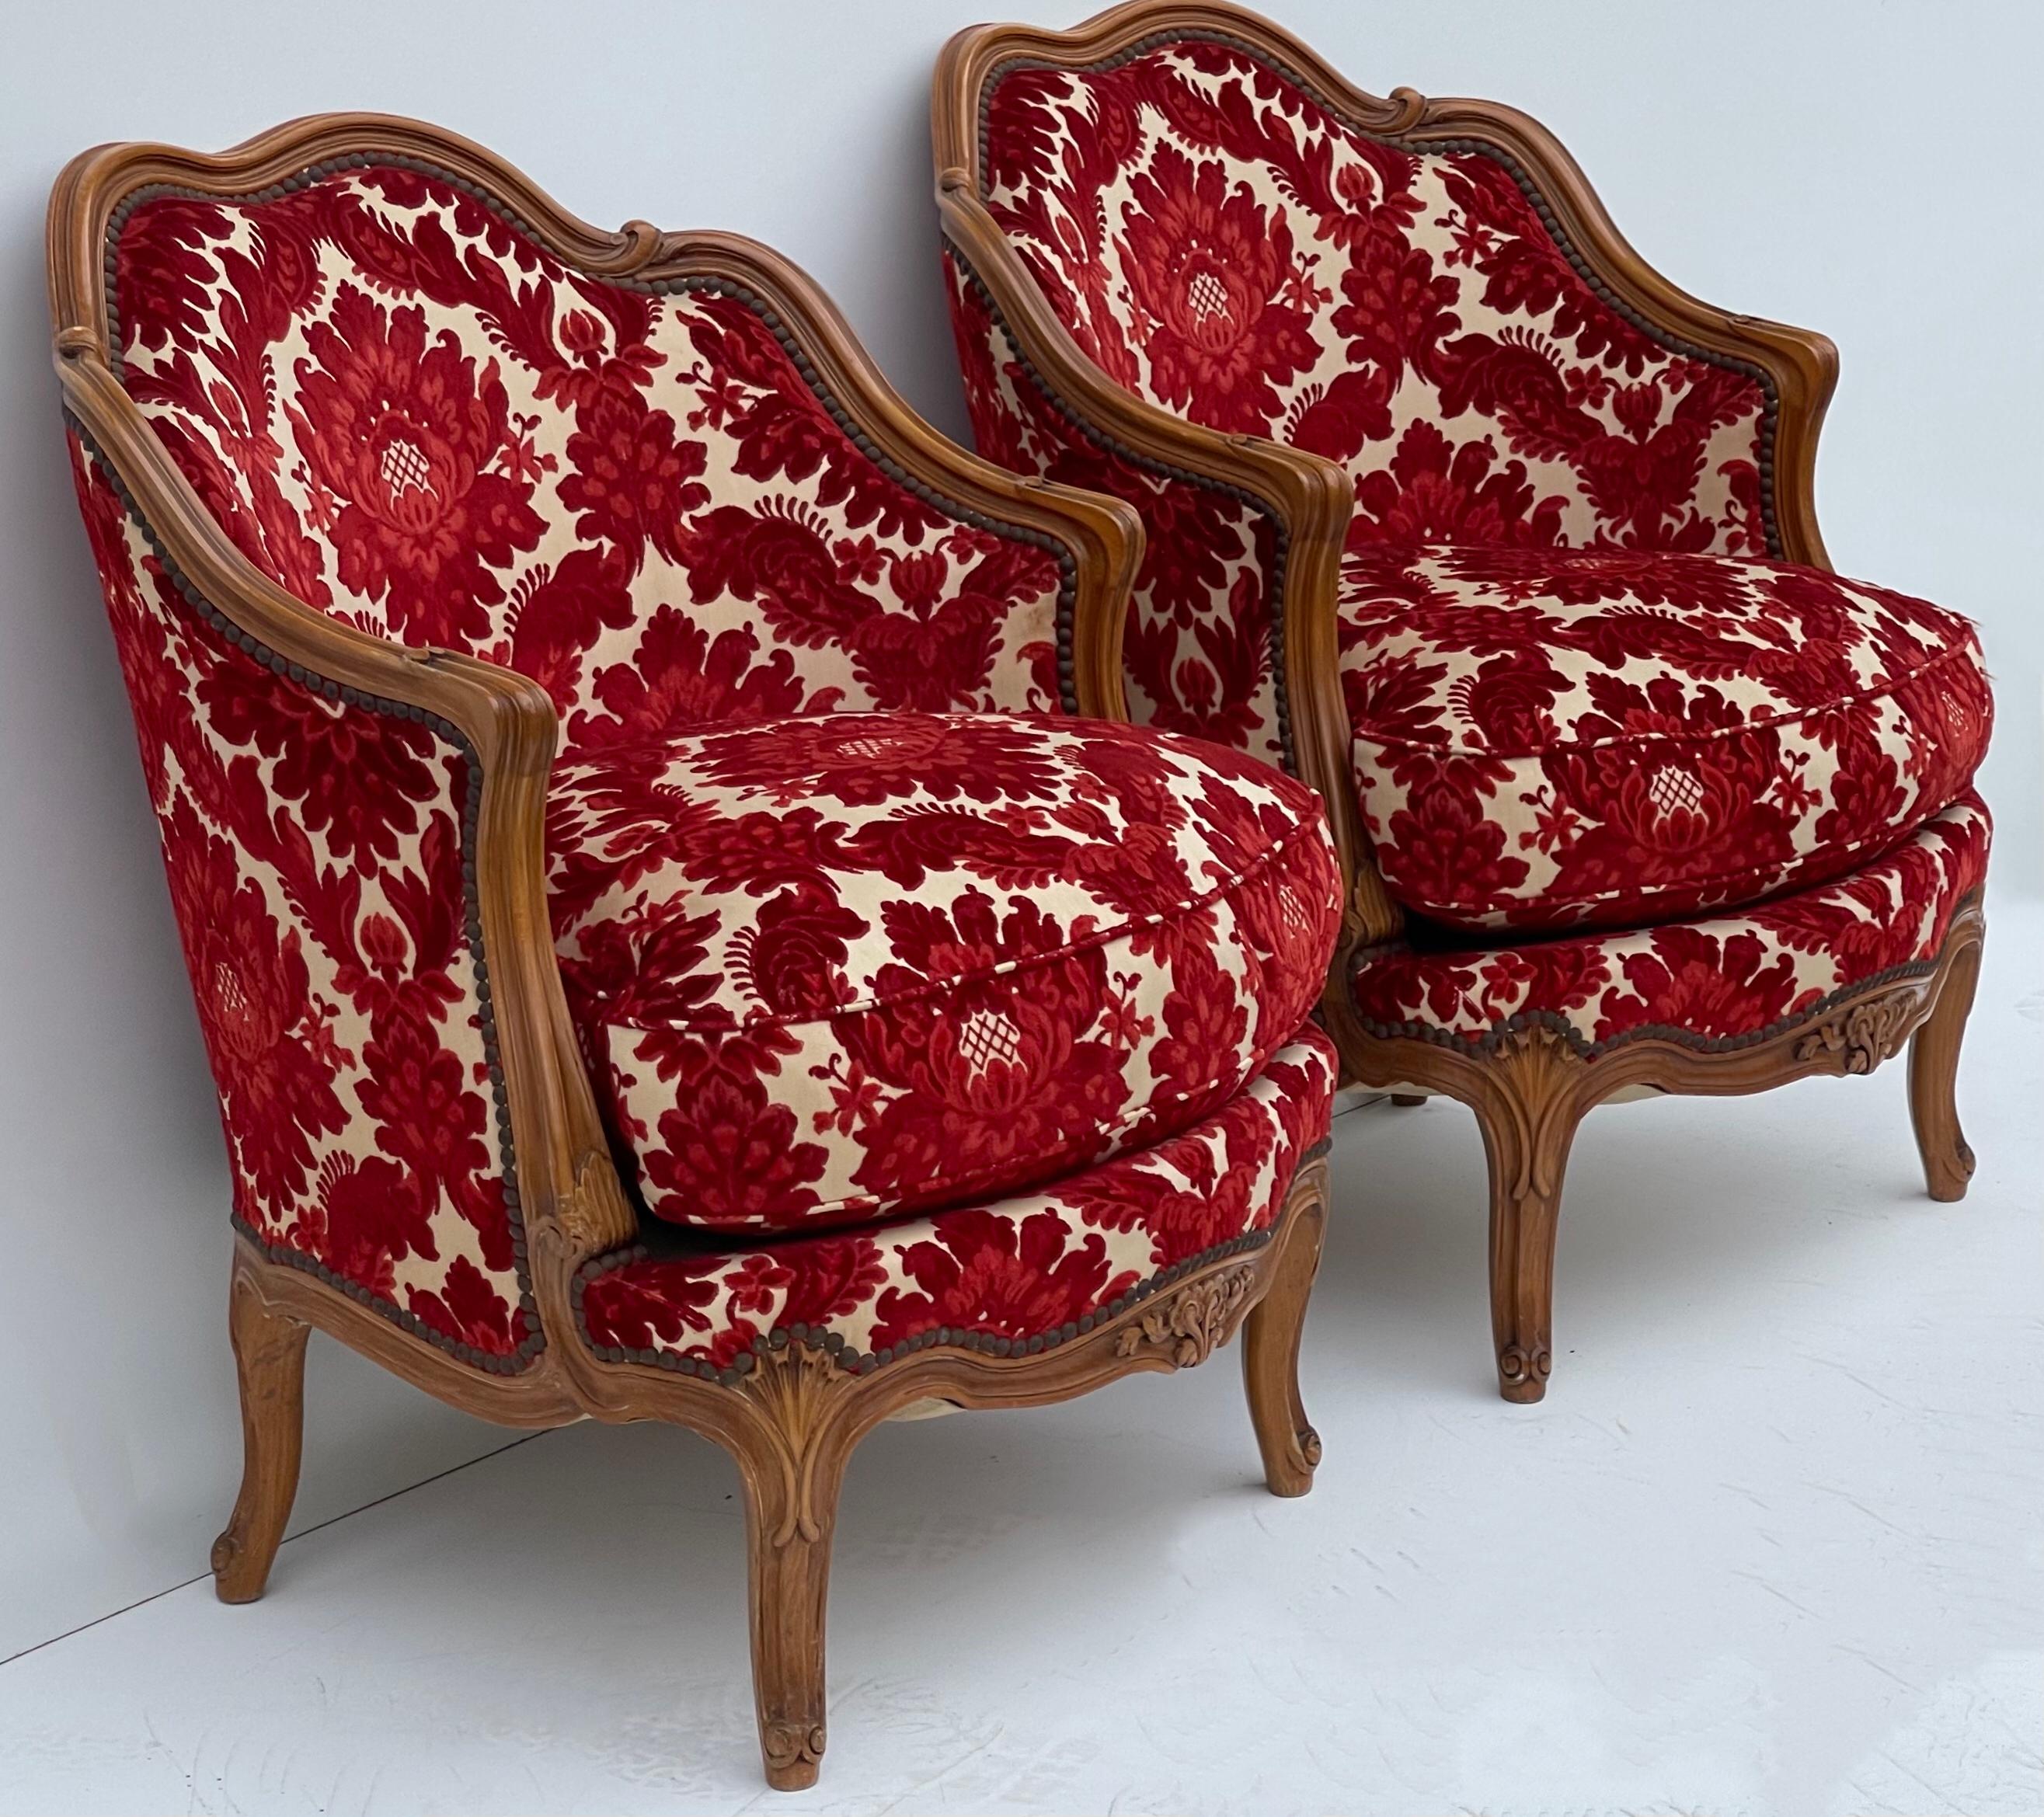 This is a wonderful pair of French carved fruitwood chairs in a vintage red cut velvet damask. Note the carving along the base and tops of the legs. The cushion is a thick down.